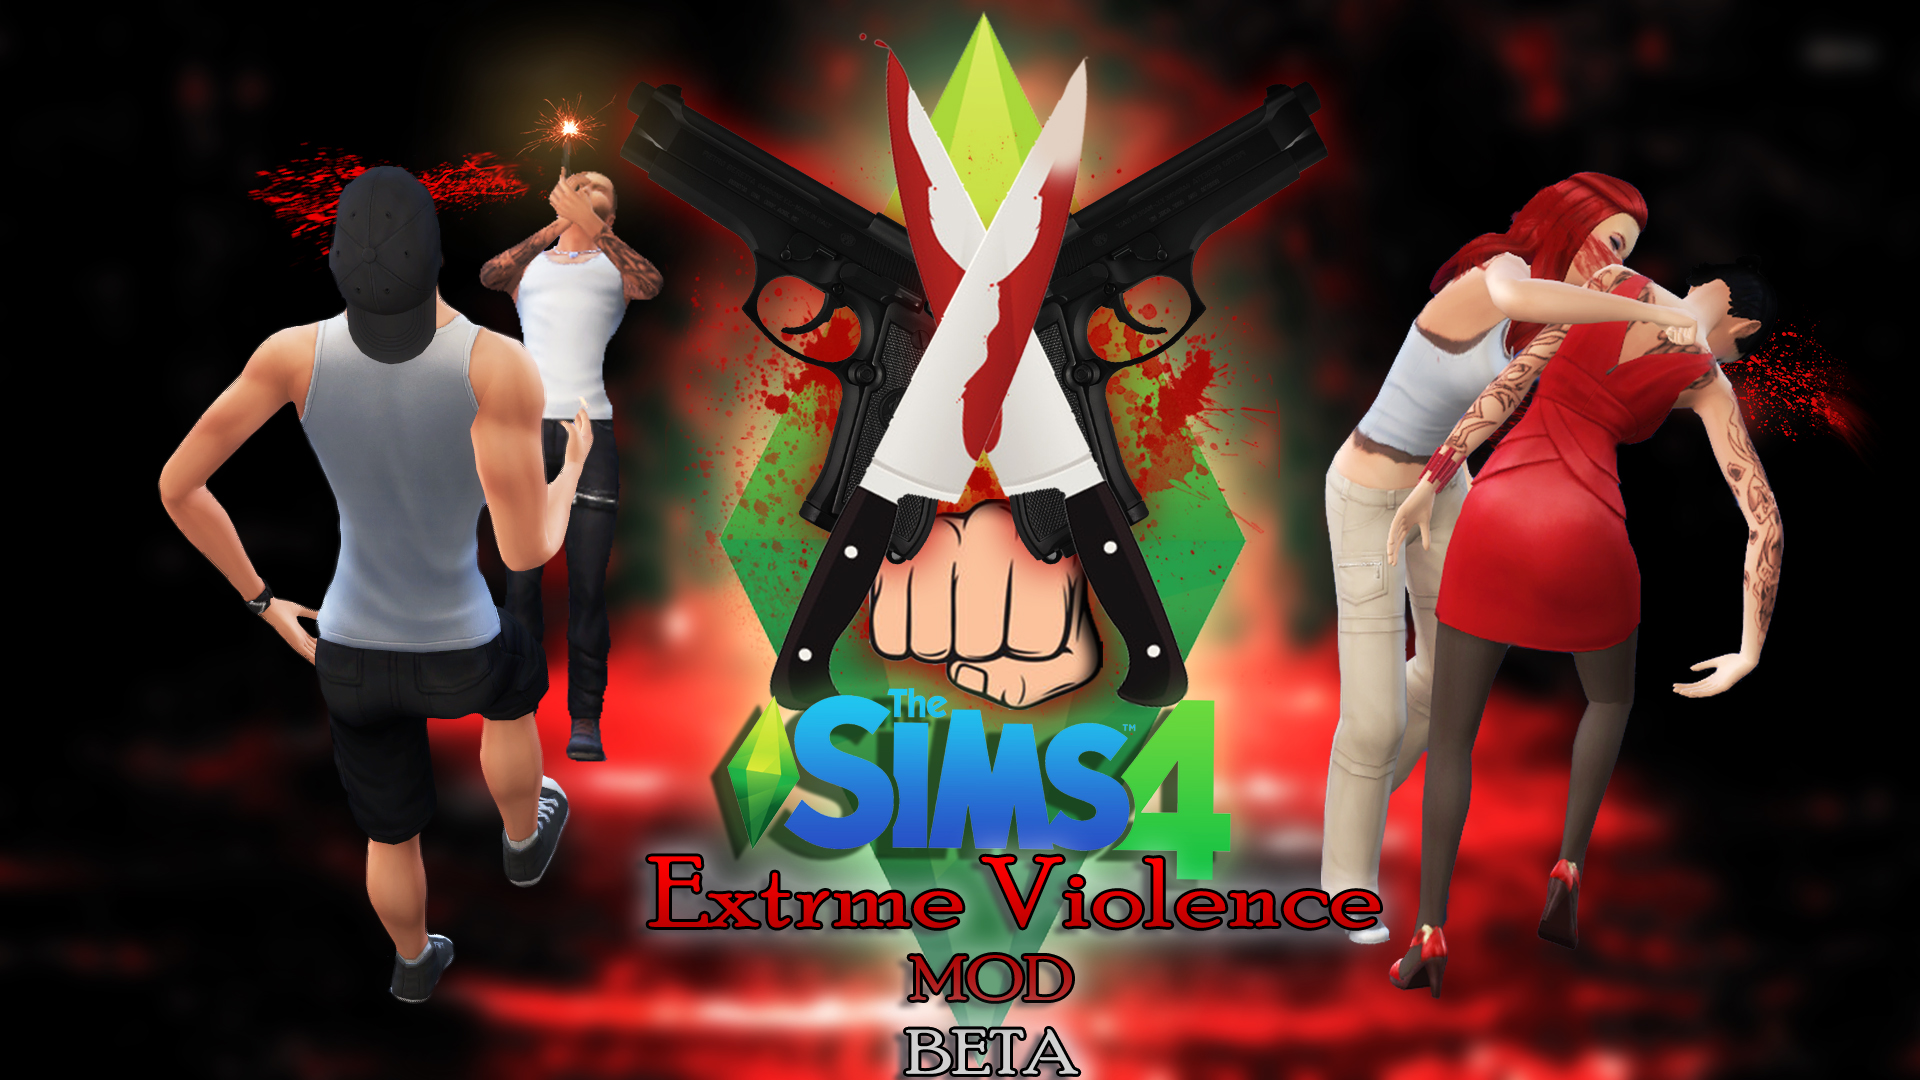 Extreme Violence mod for The Sims 4 Mod DB